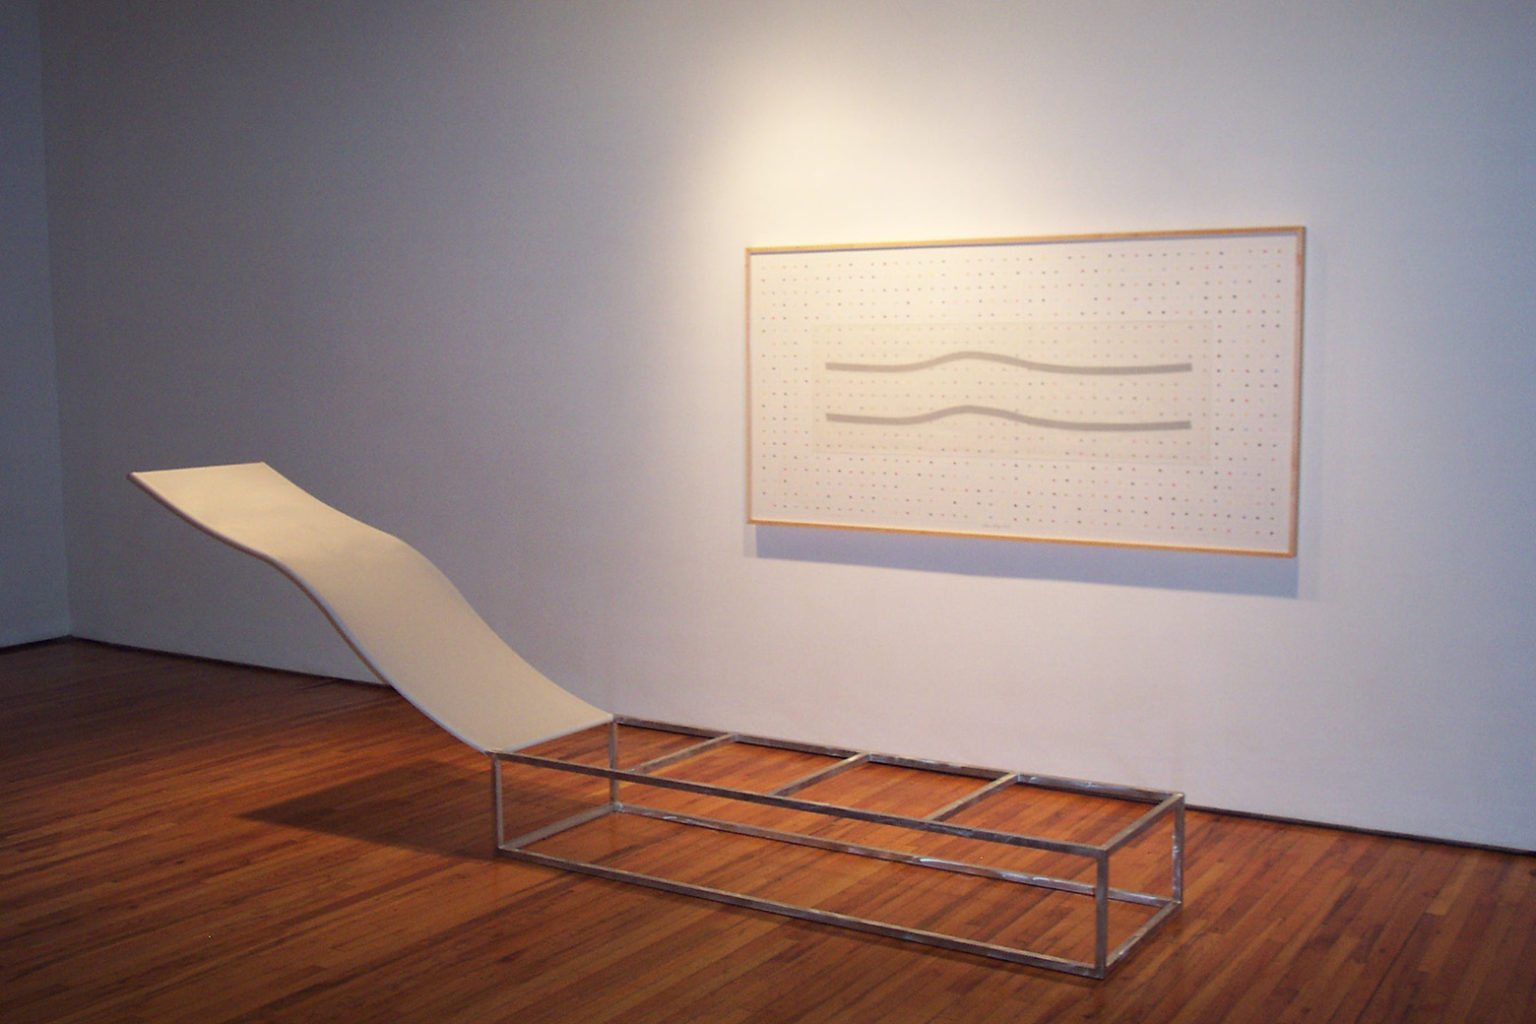 Cantilevered Plane, Installation View 48” at end of cantilever, 14”h boxed structure x 164”w x 26”d